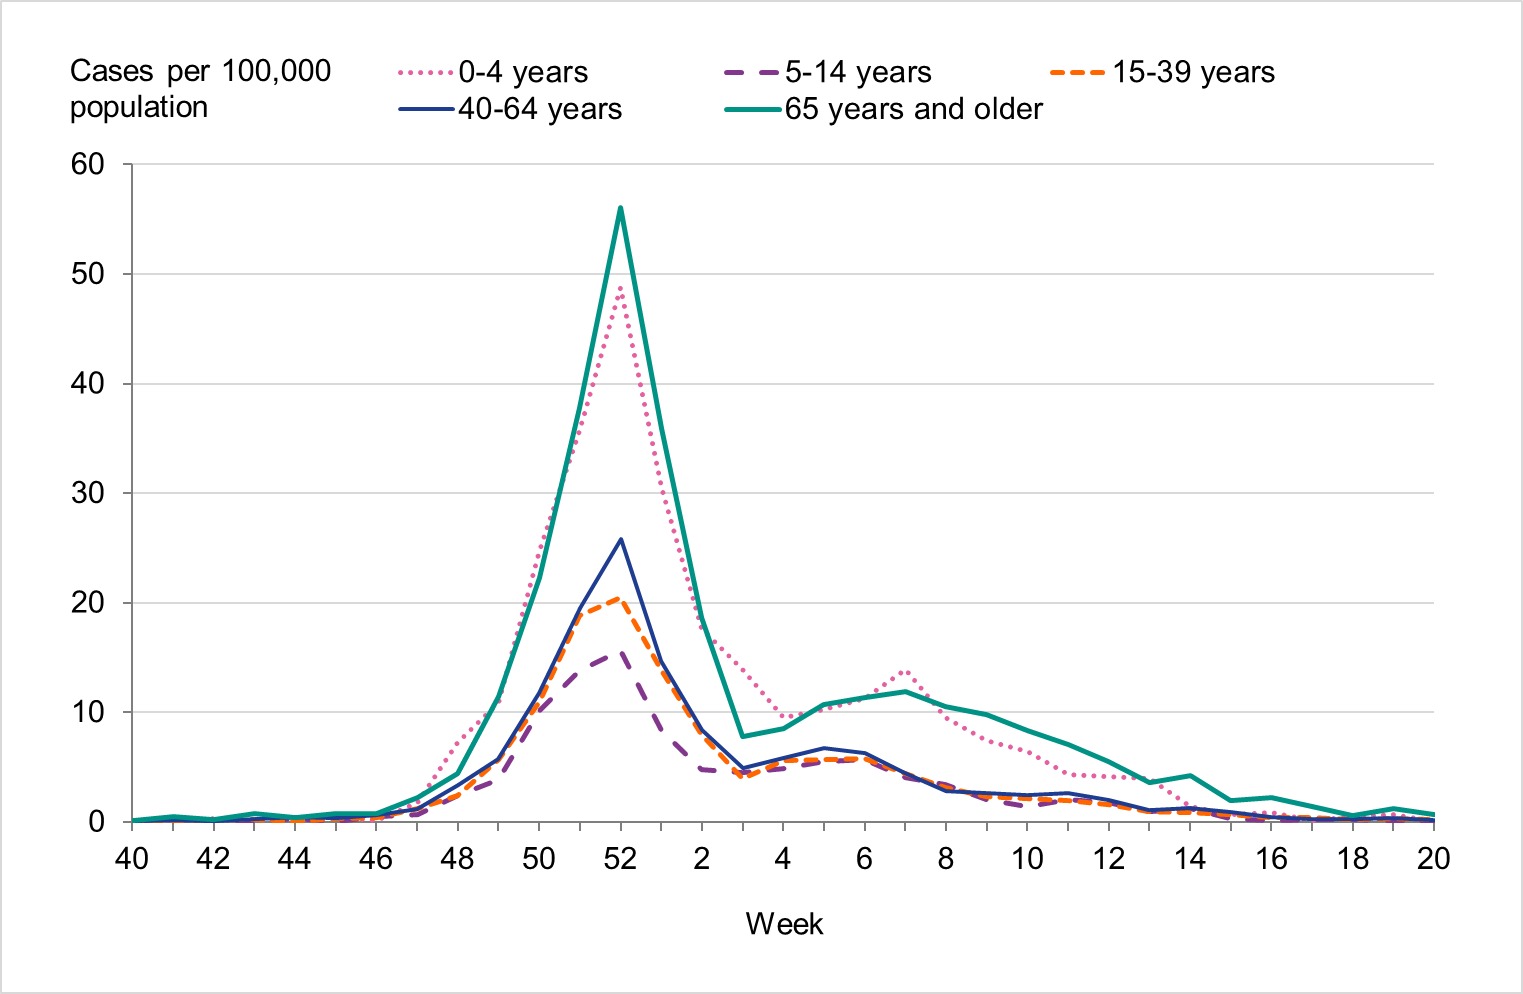 All age groups peak in week 52, with the highest peak among those 65 years and older, followed by children under 5. 